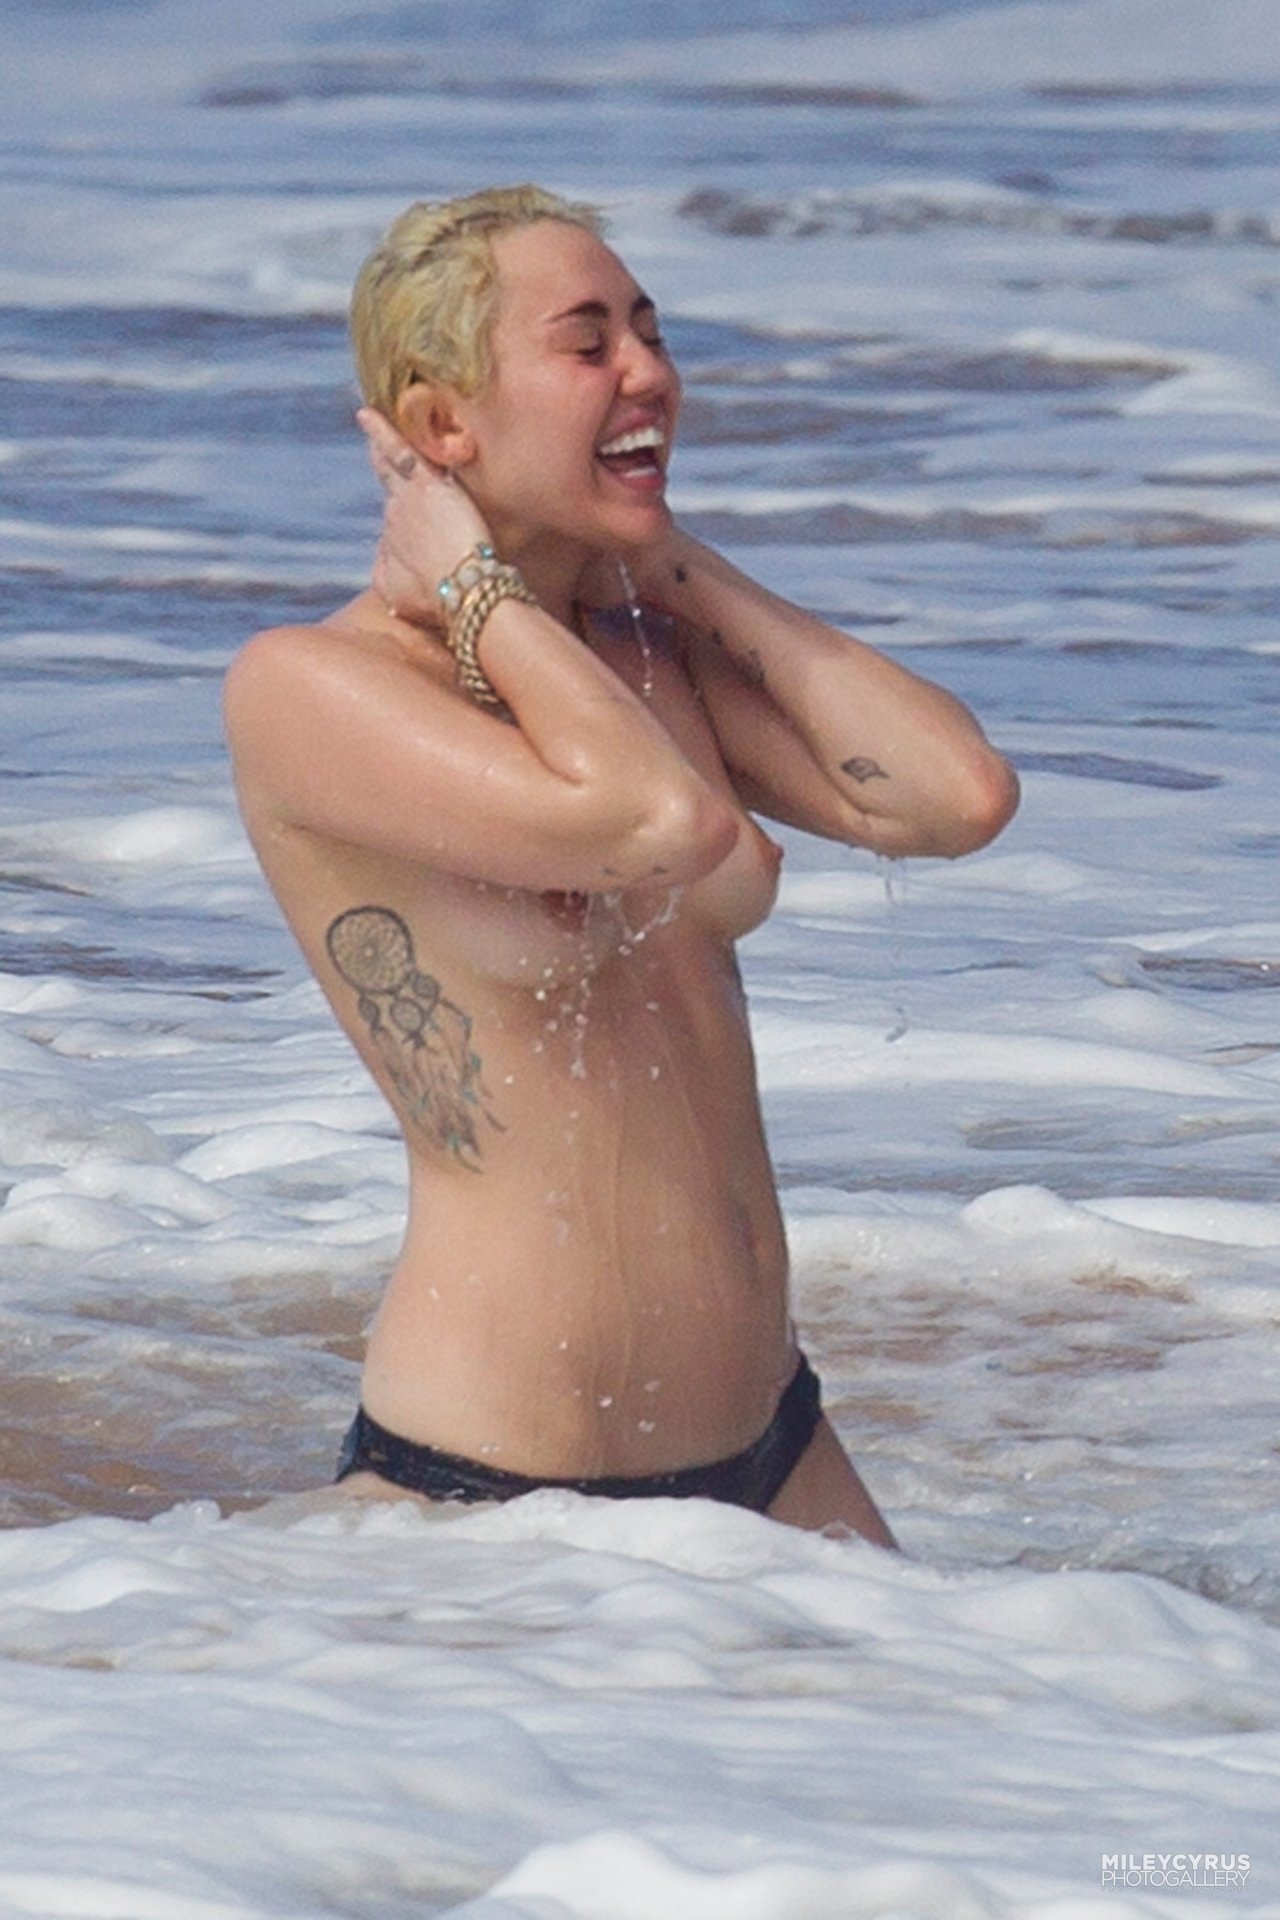 Miley cyrus nude naked topless